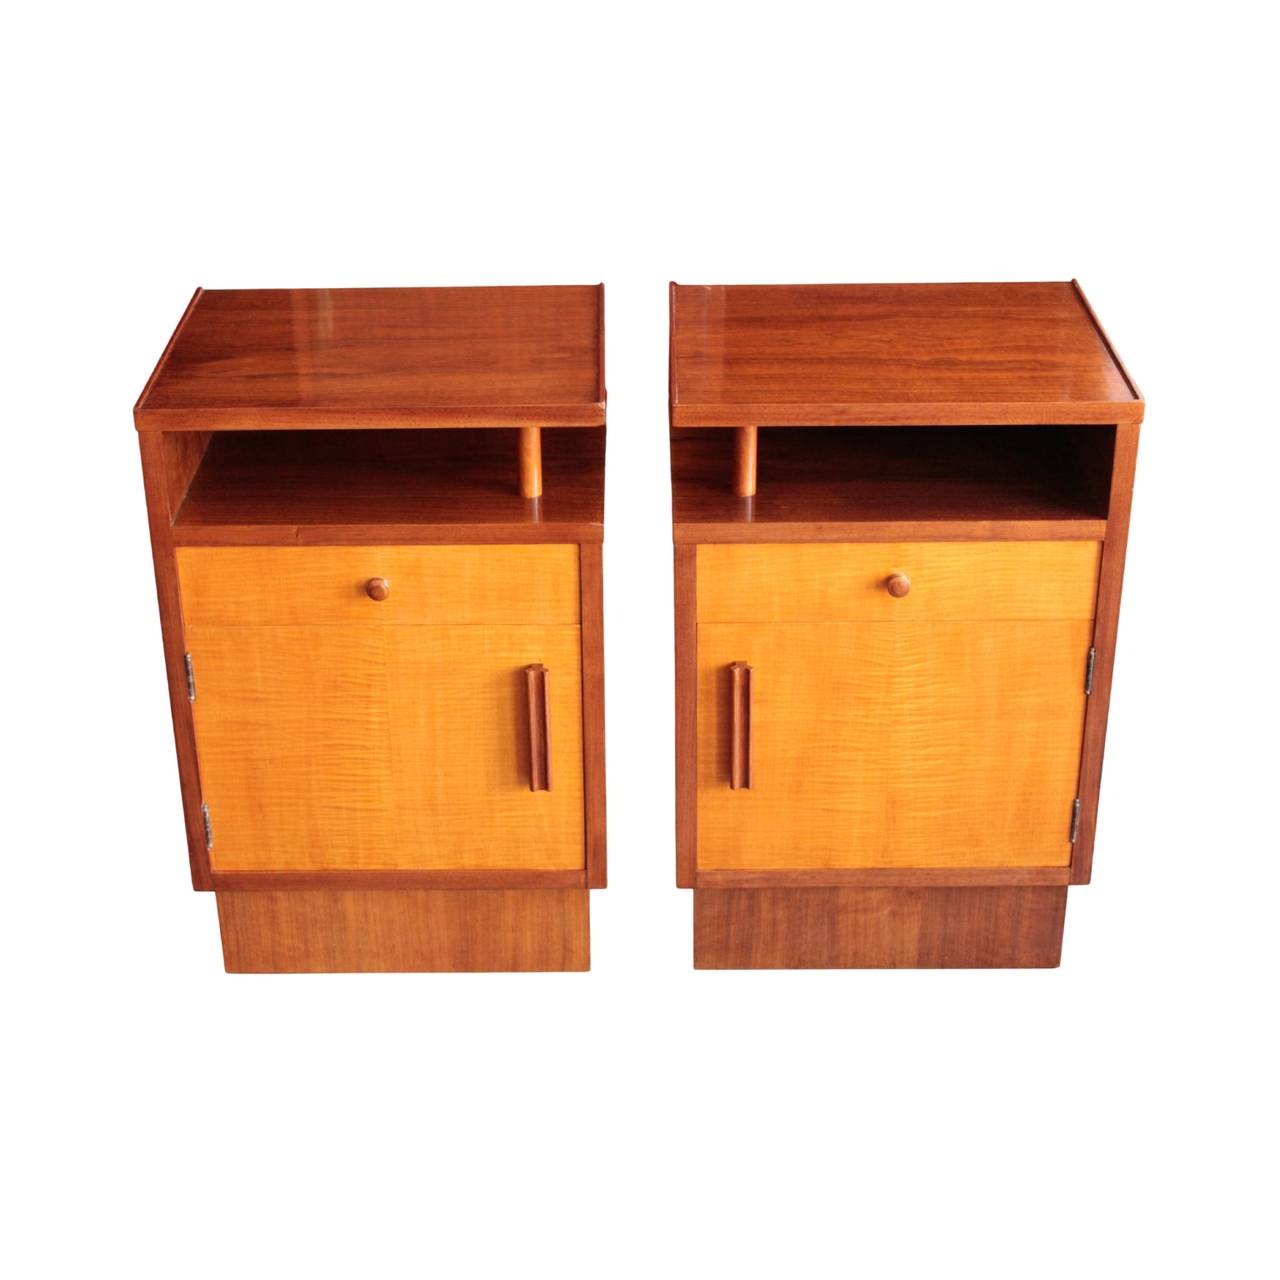 Cabinet in walnut having an exposed storage niche under the top supported by a small colonnette on top of a drawer in satinwood fitted with a round pull and a single door in satinwood fitted with a long handle, enclosing walnut interior with a